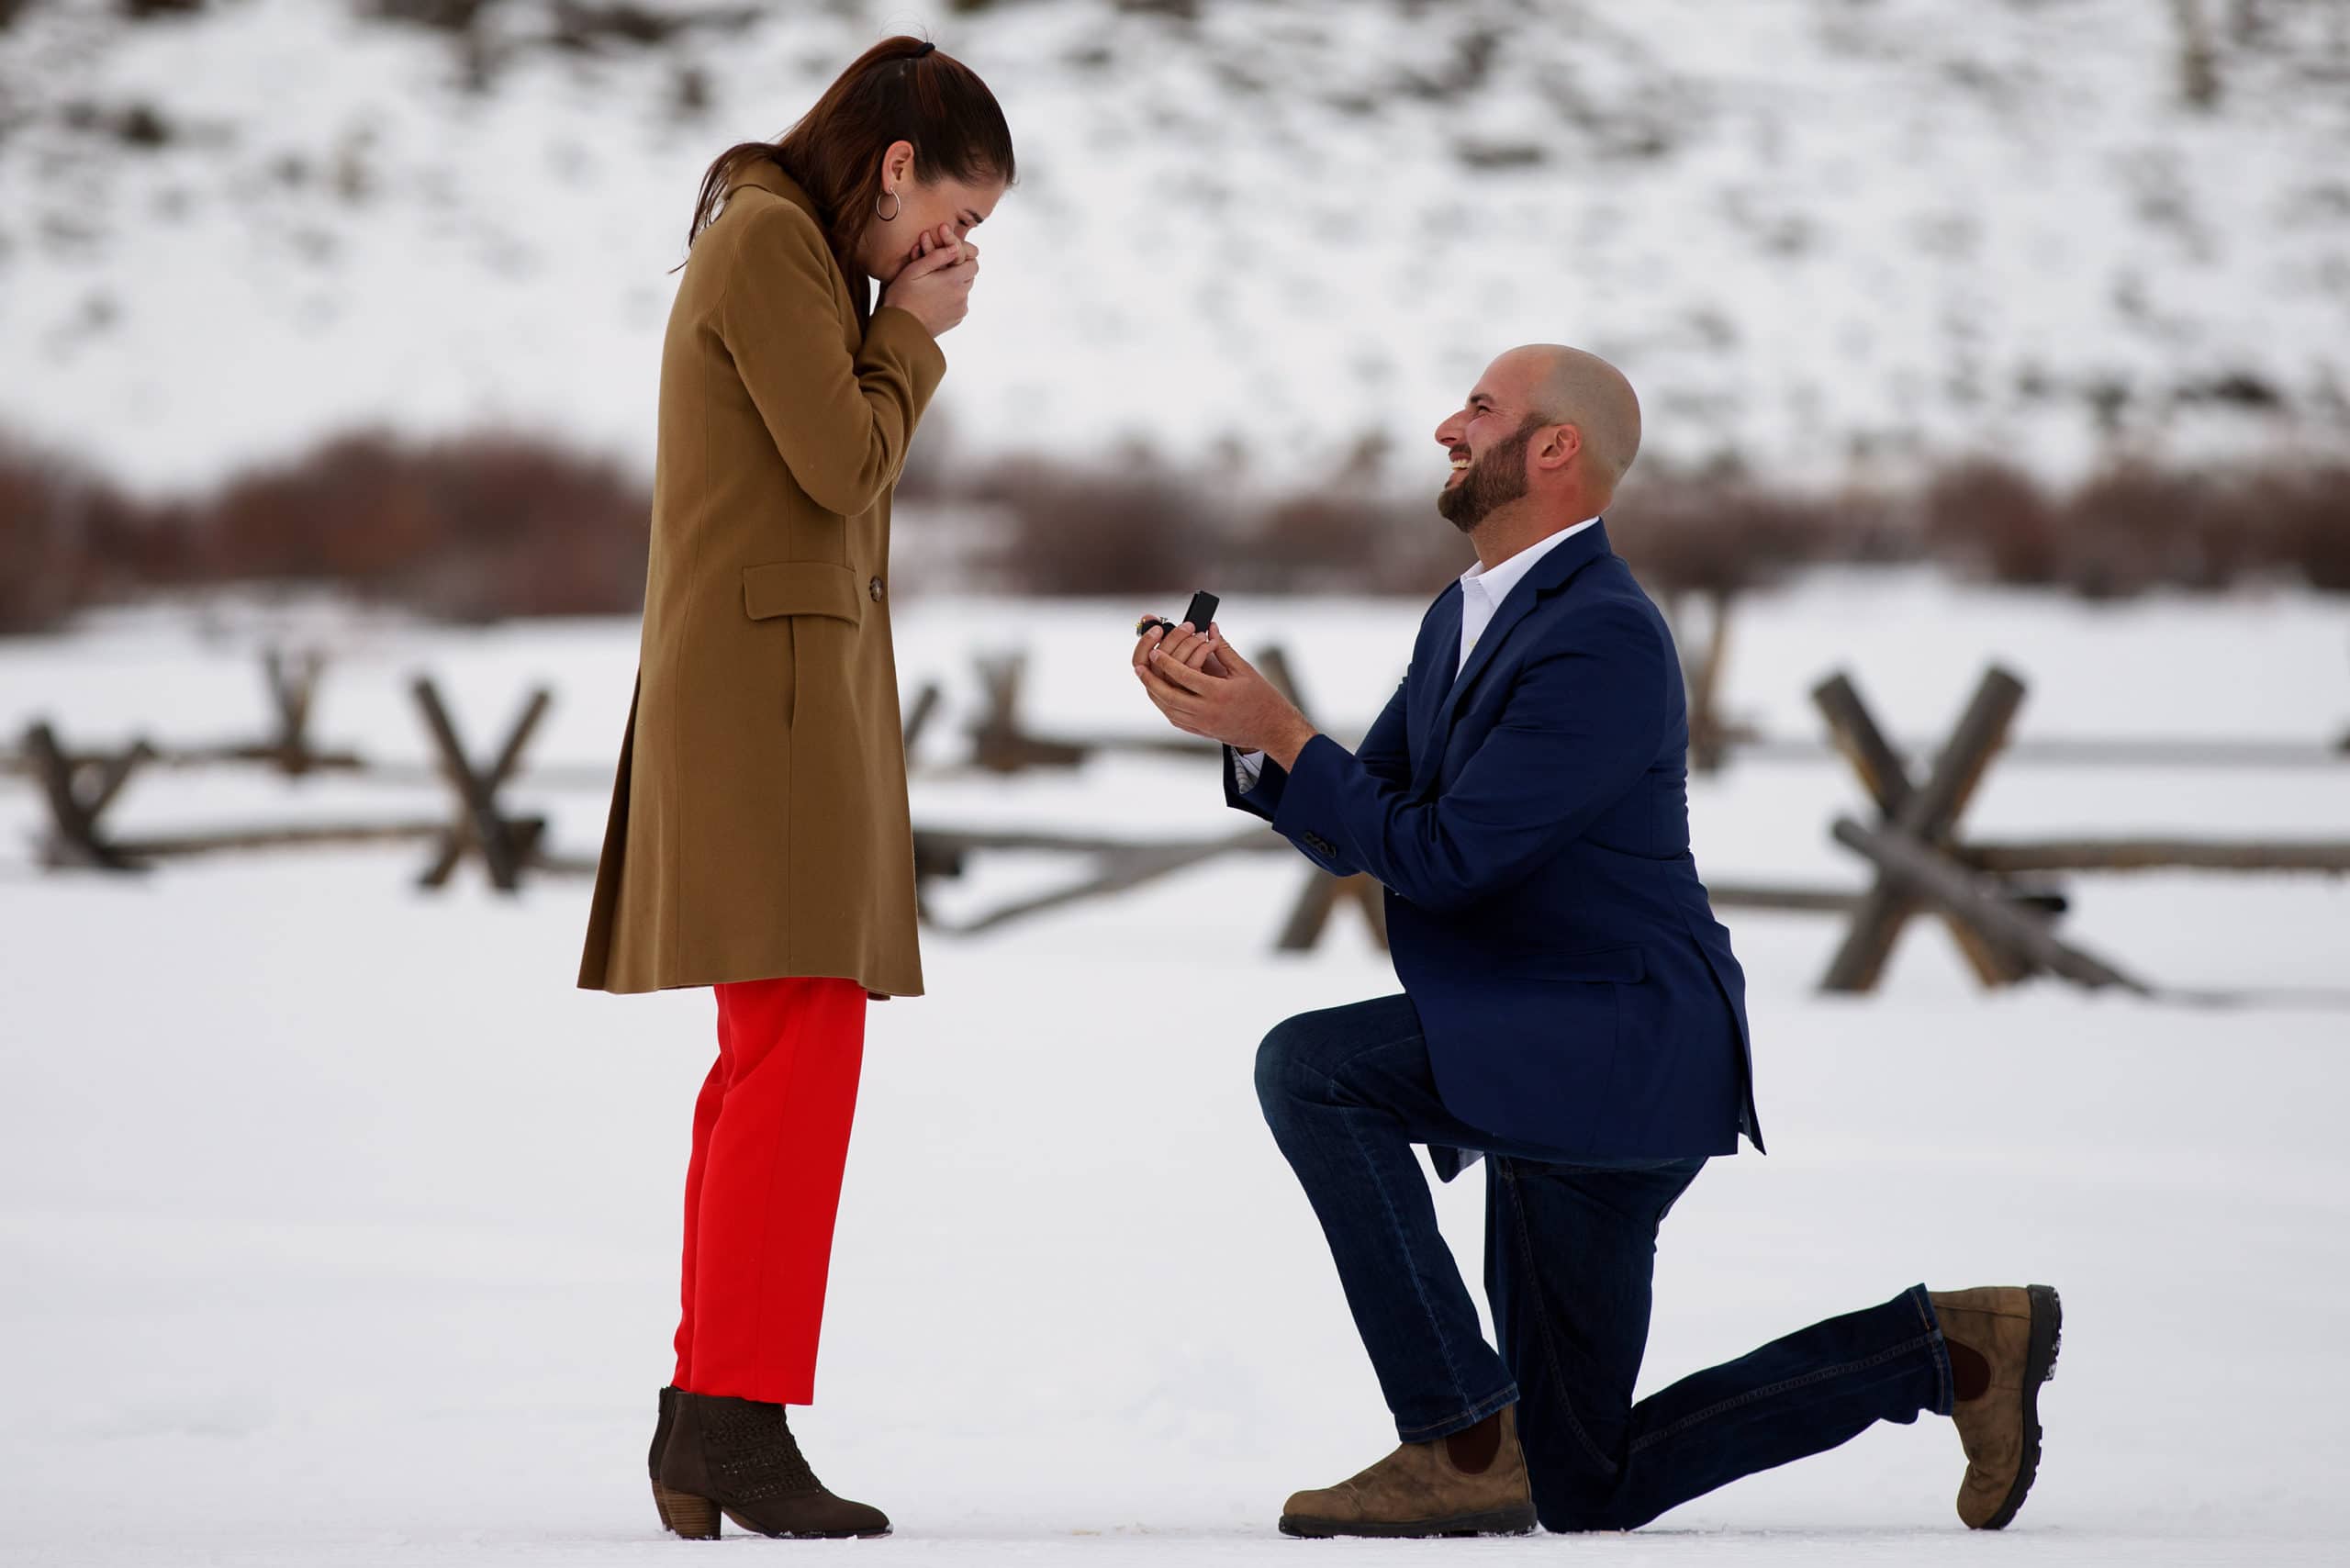 Sarah reacts as Michael proposes during the winter at Devil’s Thumb Ranch in Tabernash, Colorado